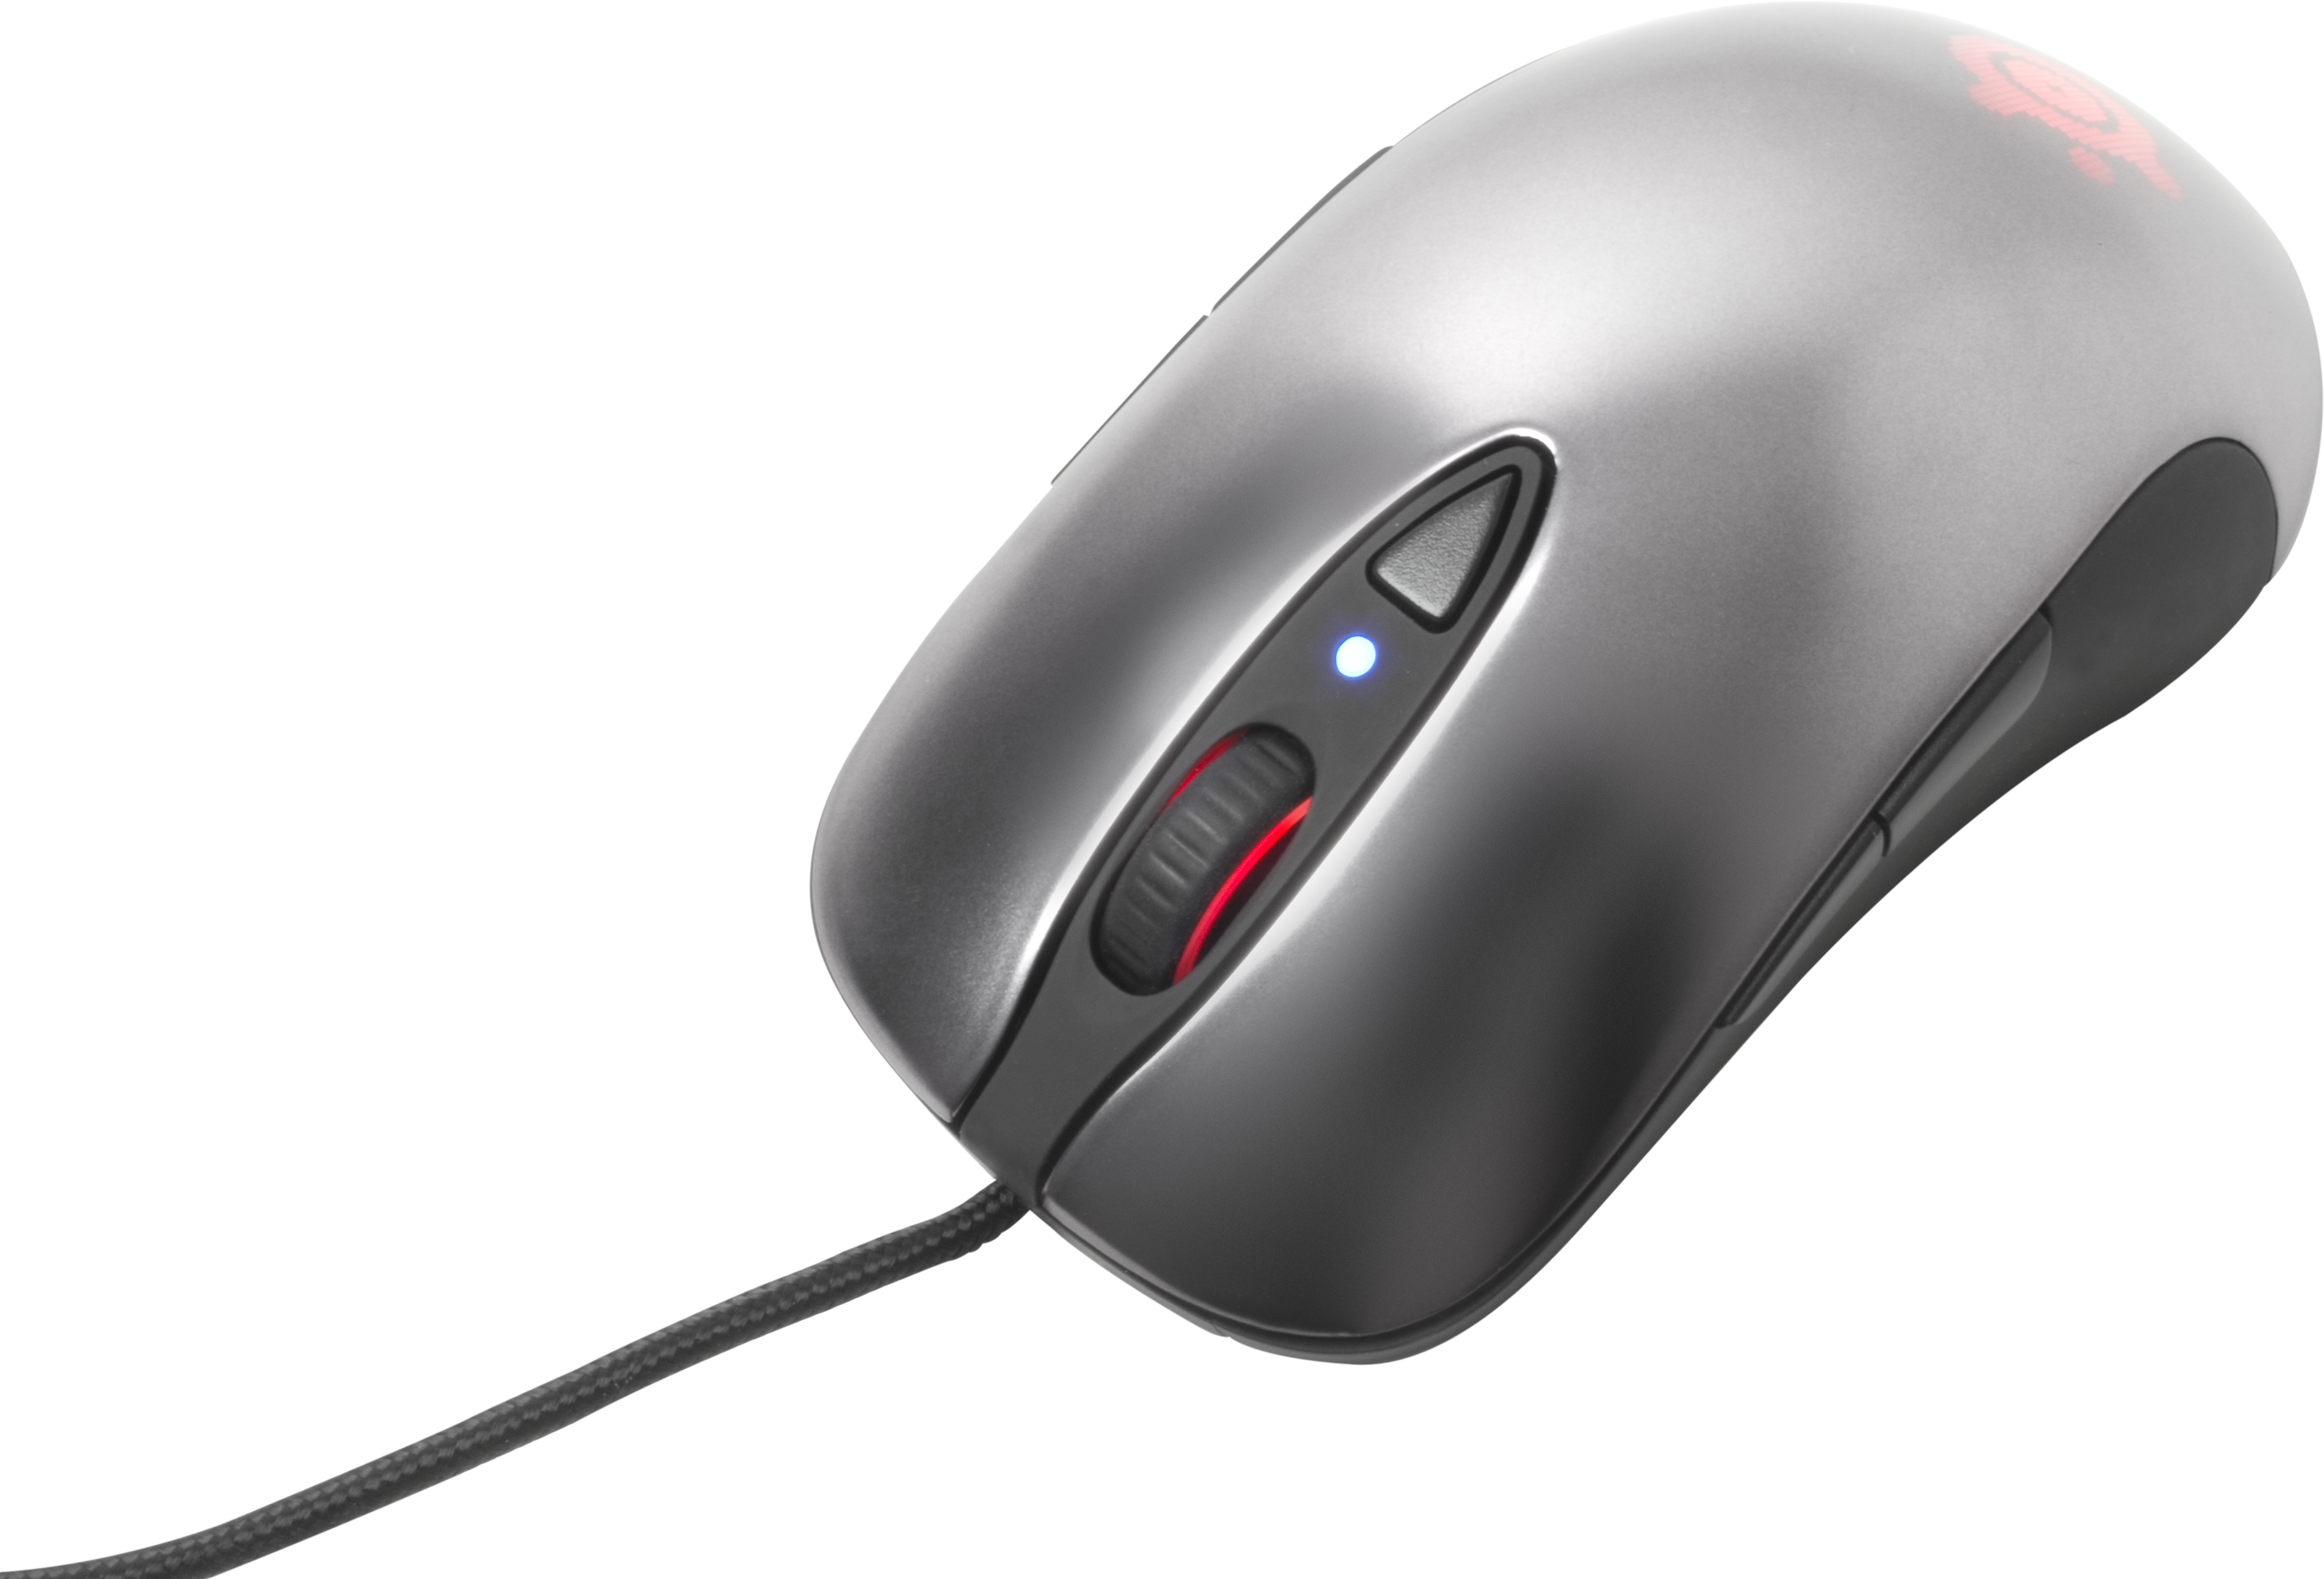 Pc Mouse Png Image - Mice, Transparent background PNG HD thumbnail